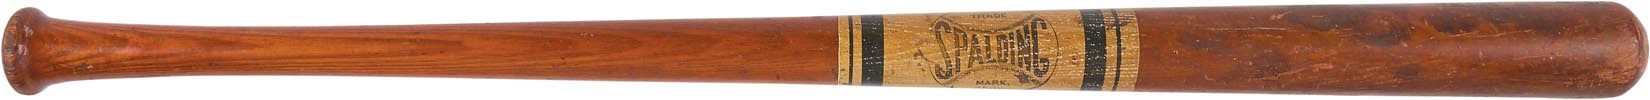 Early Baseball - 1884 Patent Spalding Bat (Samuel M. Chase Collection)